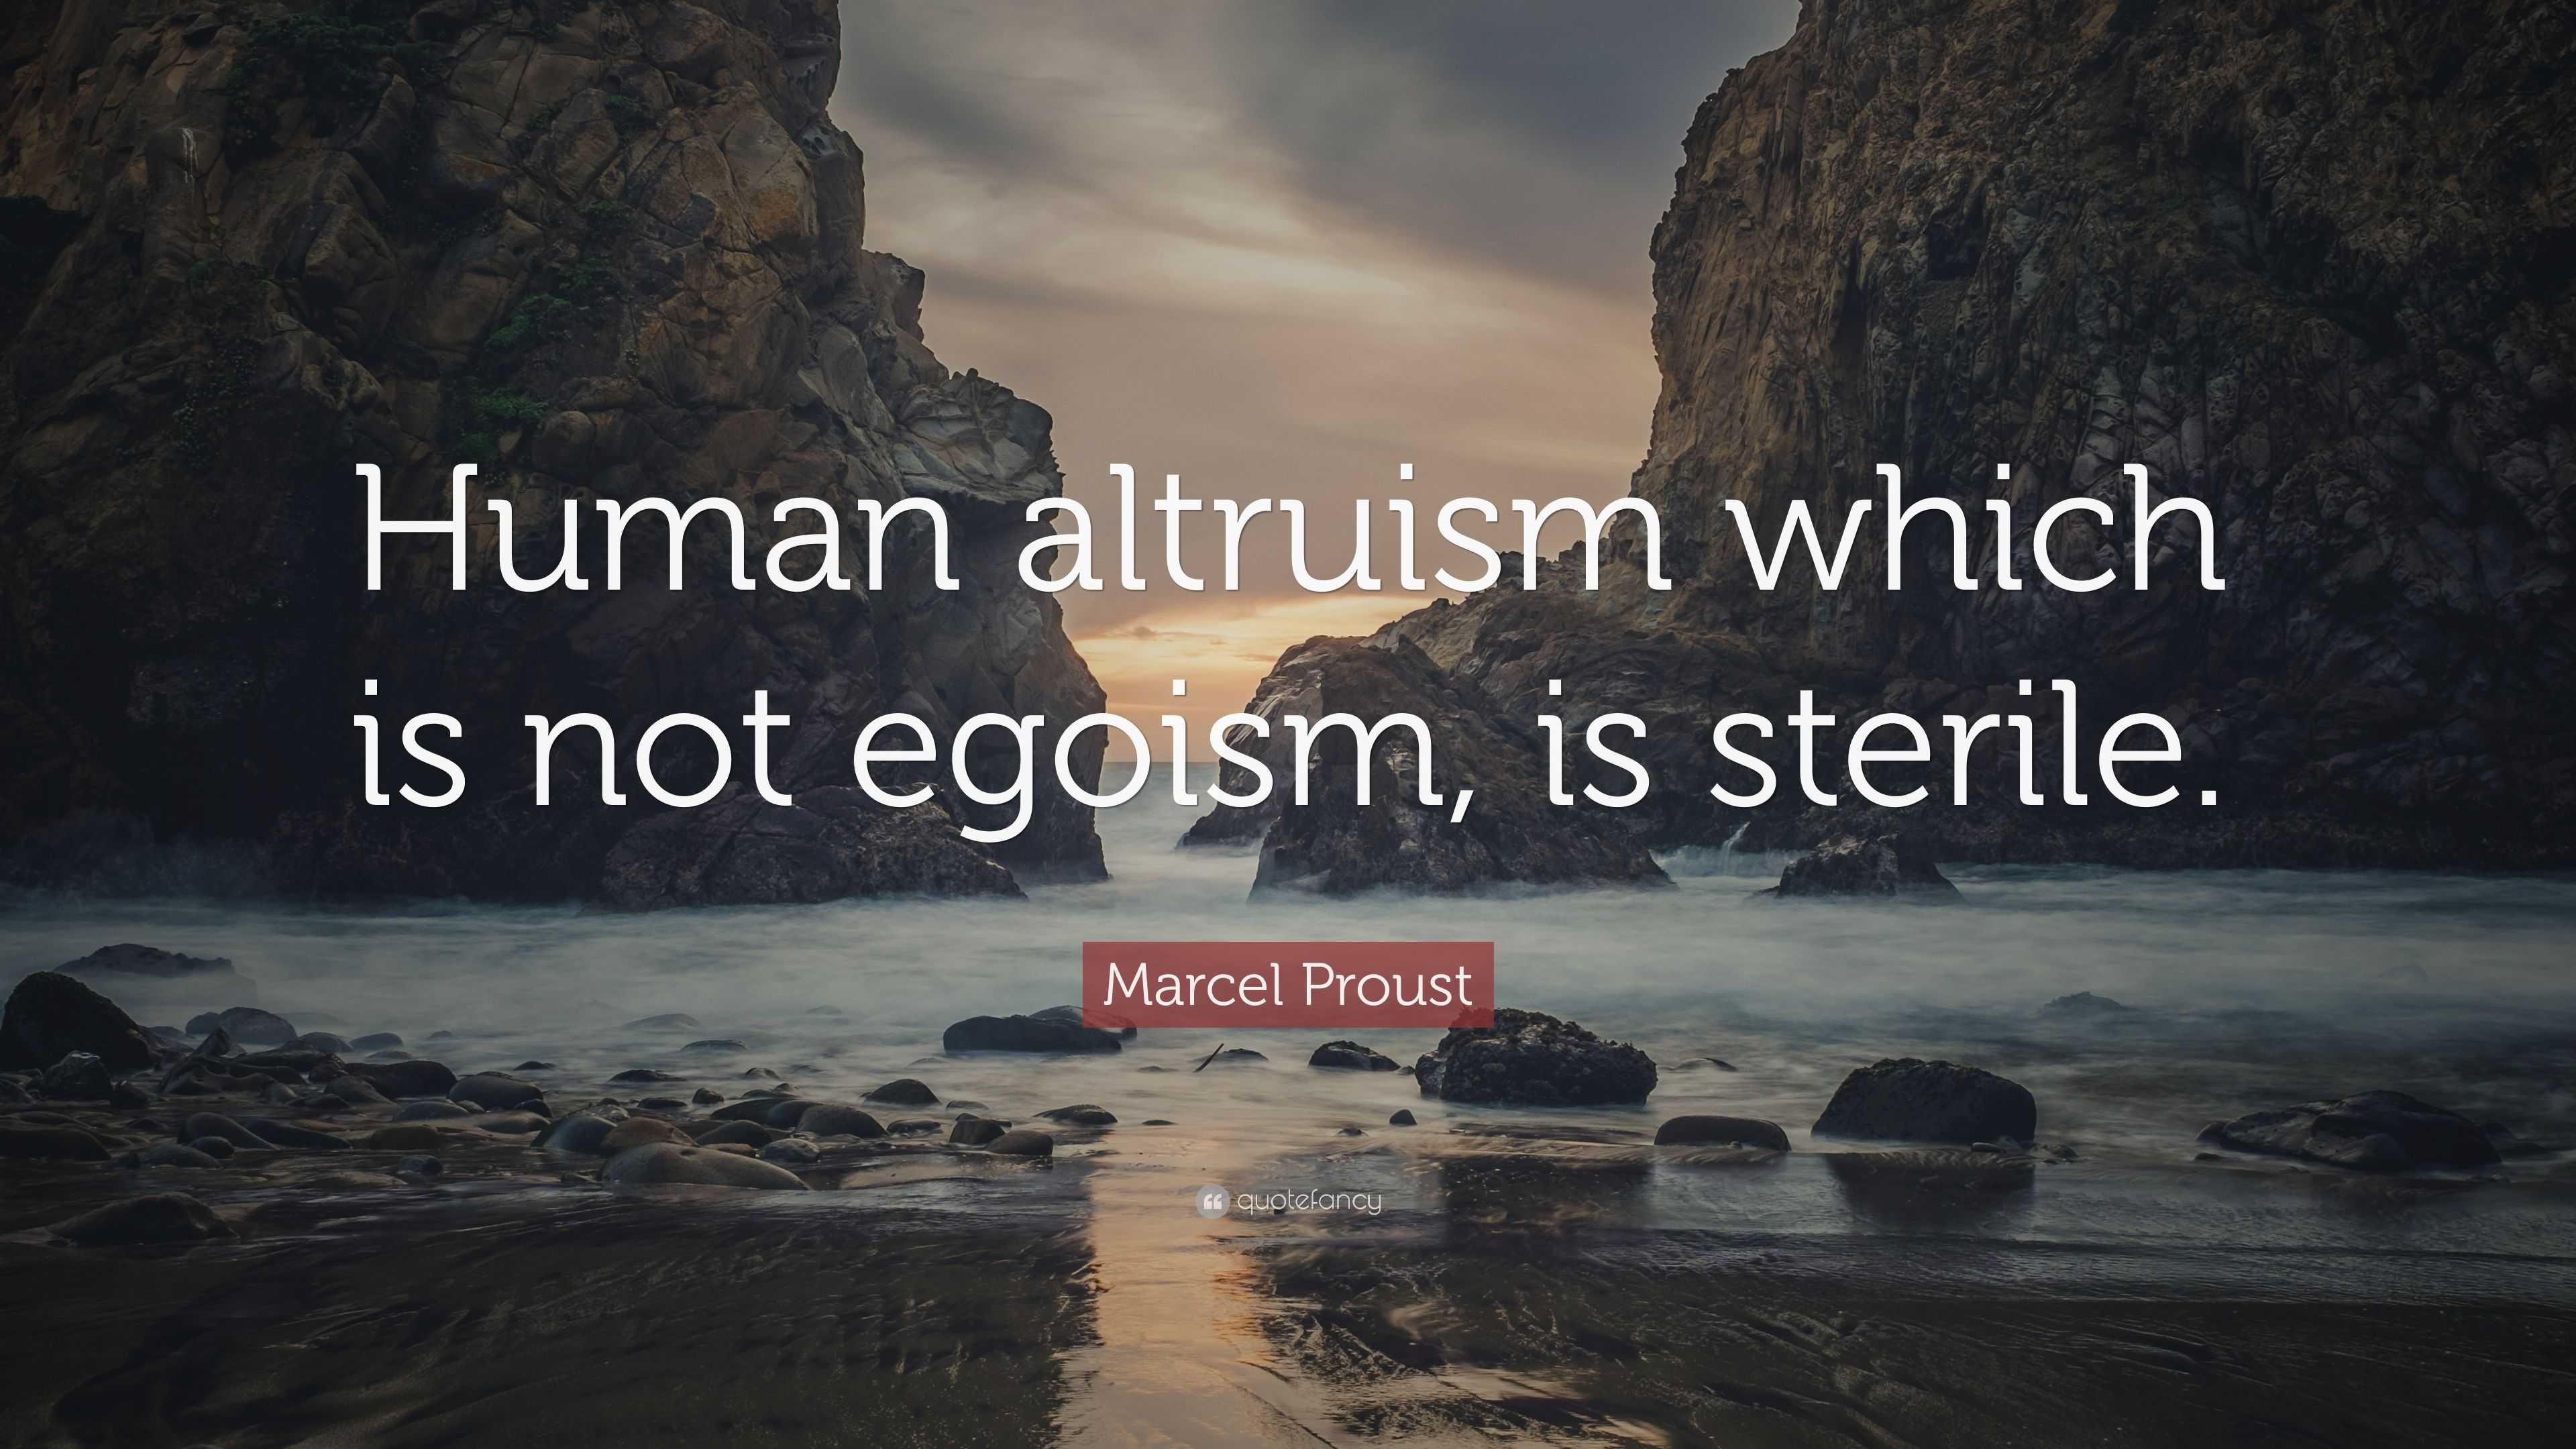 Marcel Proust Quote: "Human altruism which is not egoism, is sterile." (10 wallpapers) - Quotefancy